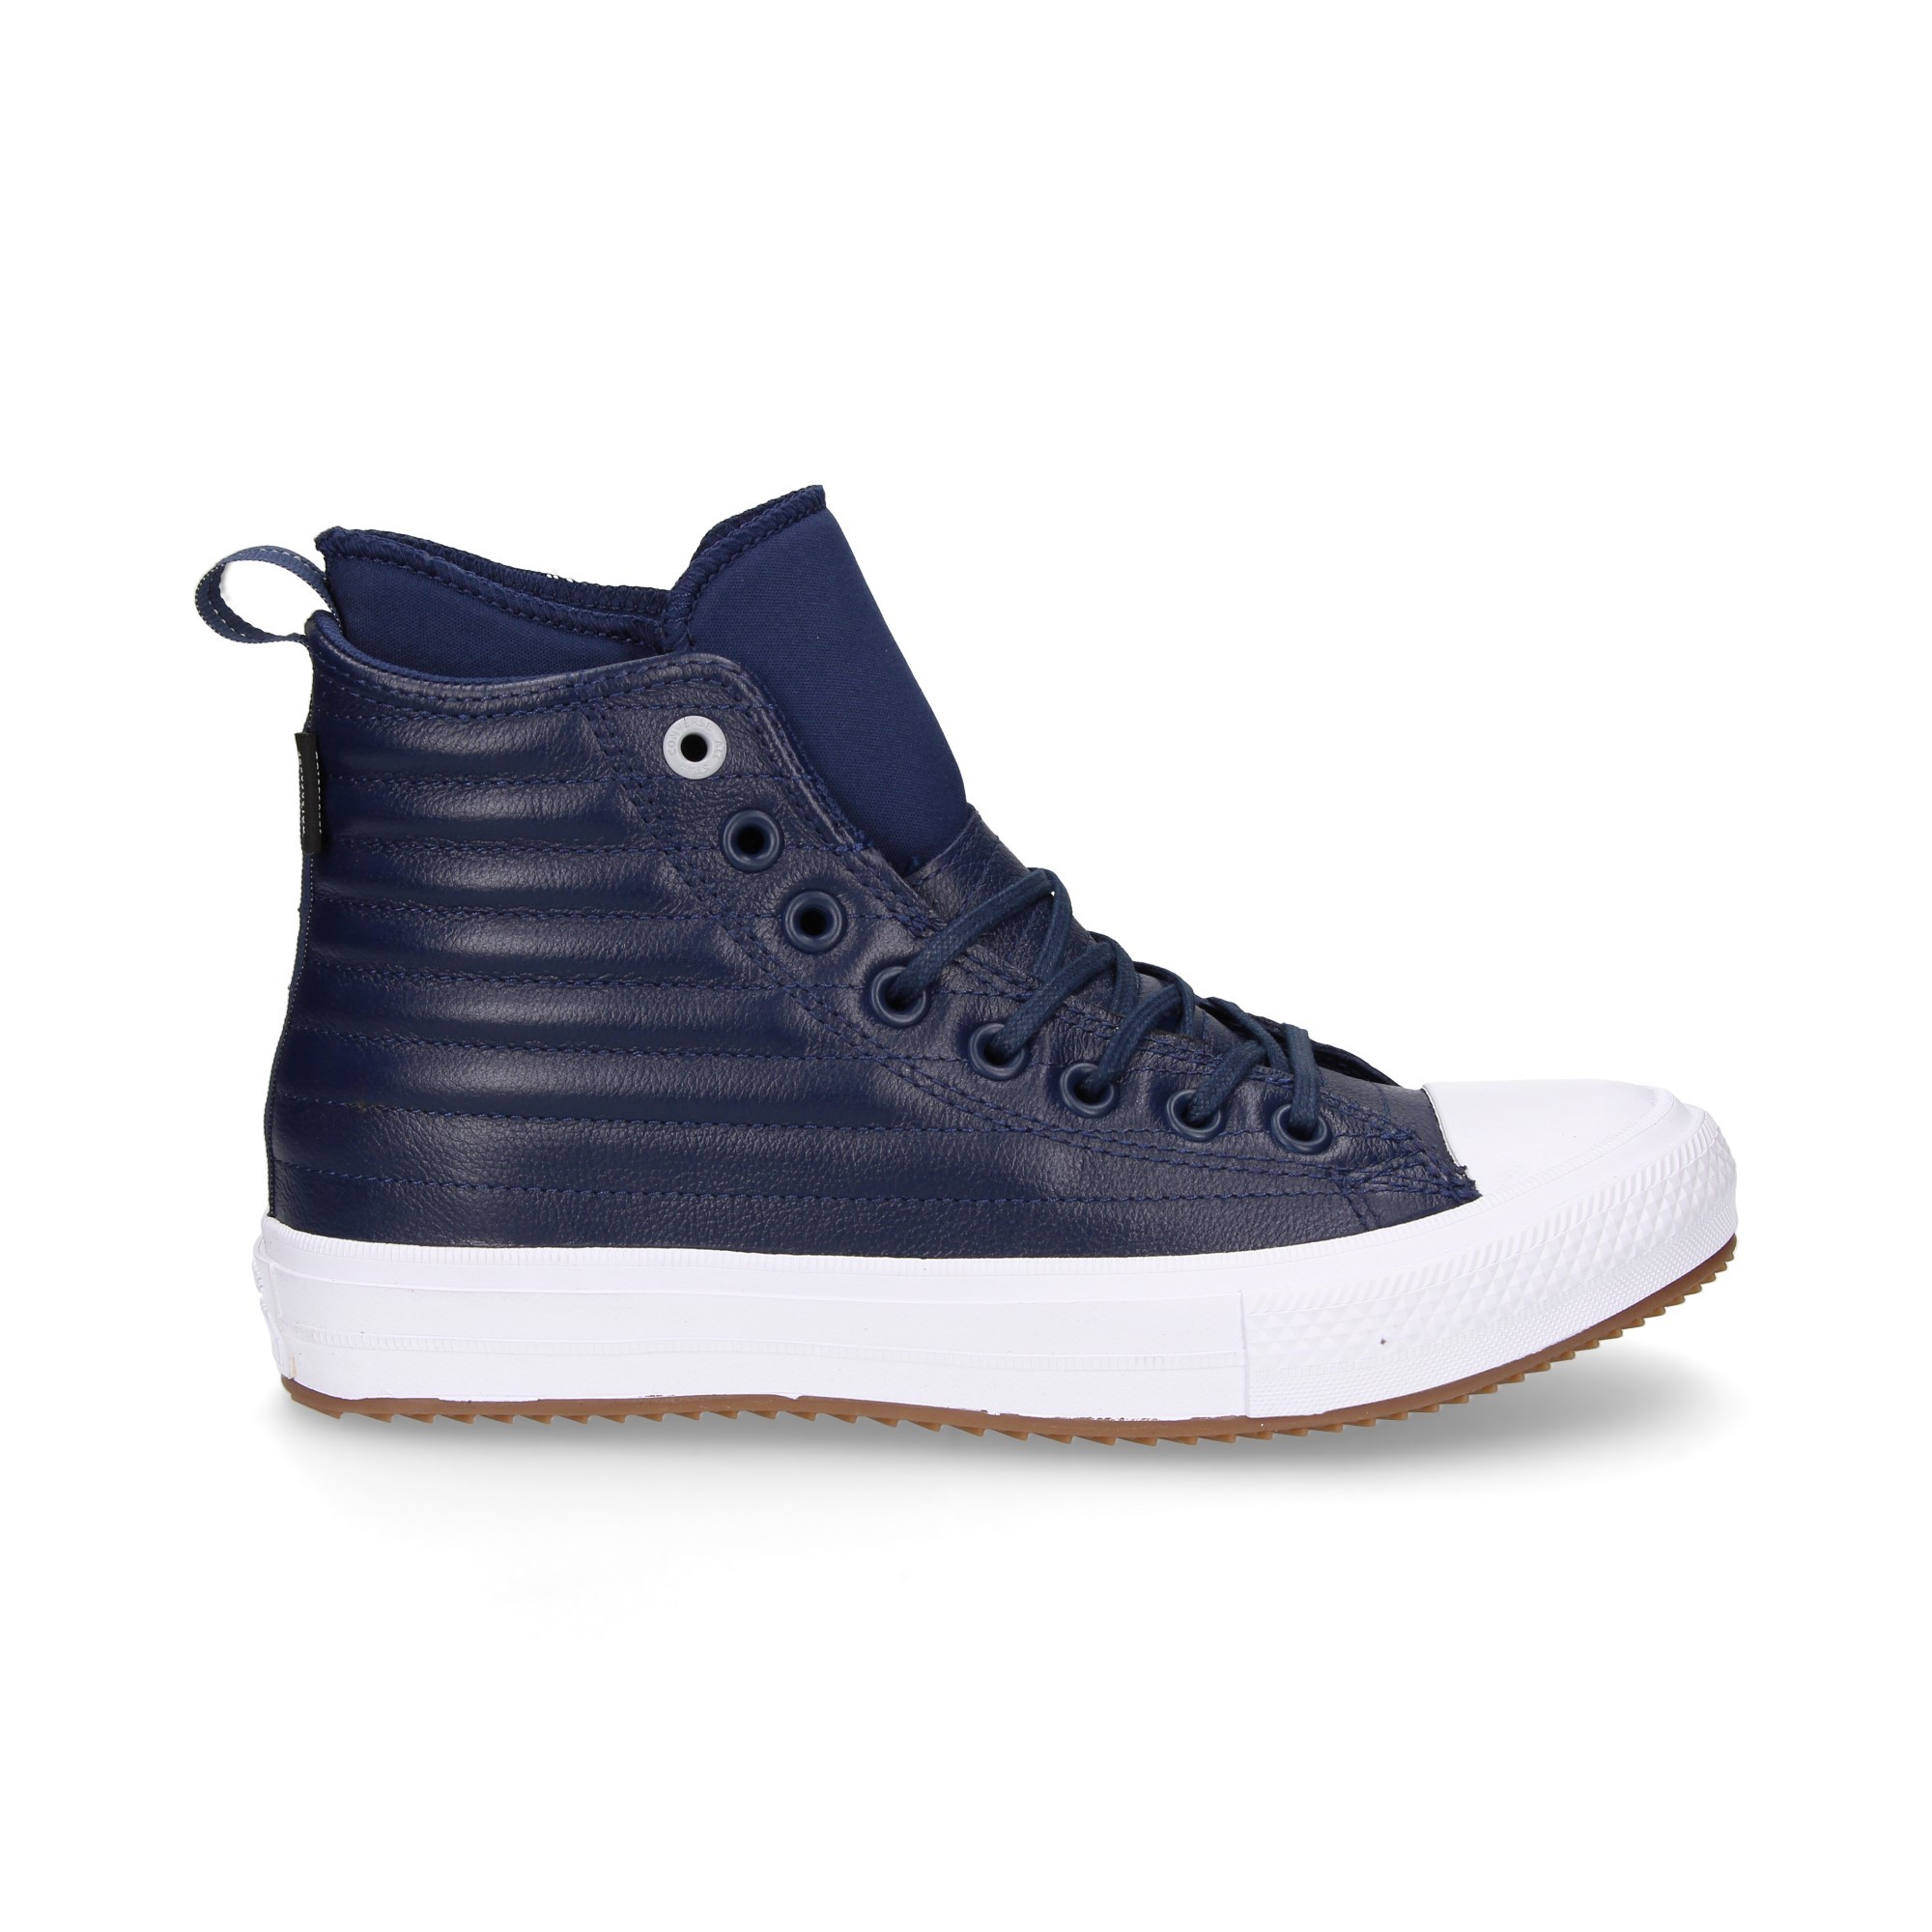 BOOTIN ALL STAR BLUE LEATHER